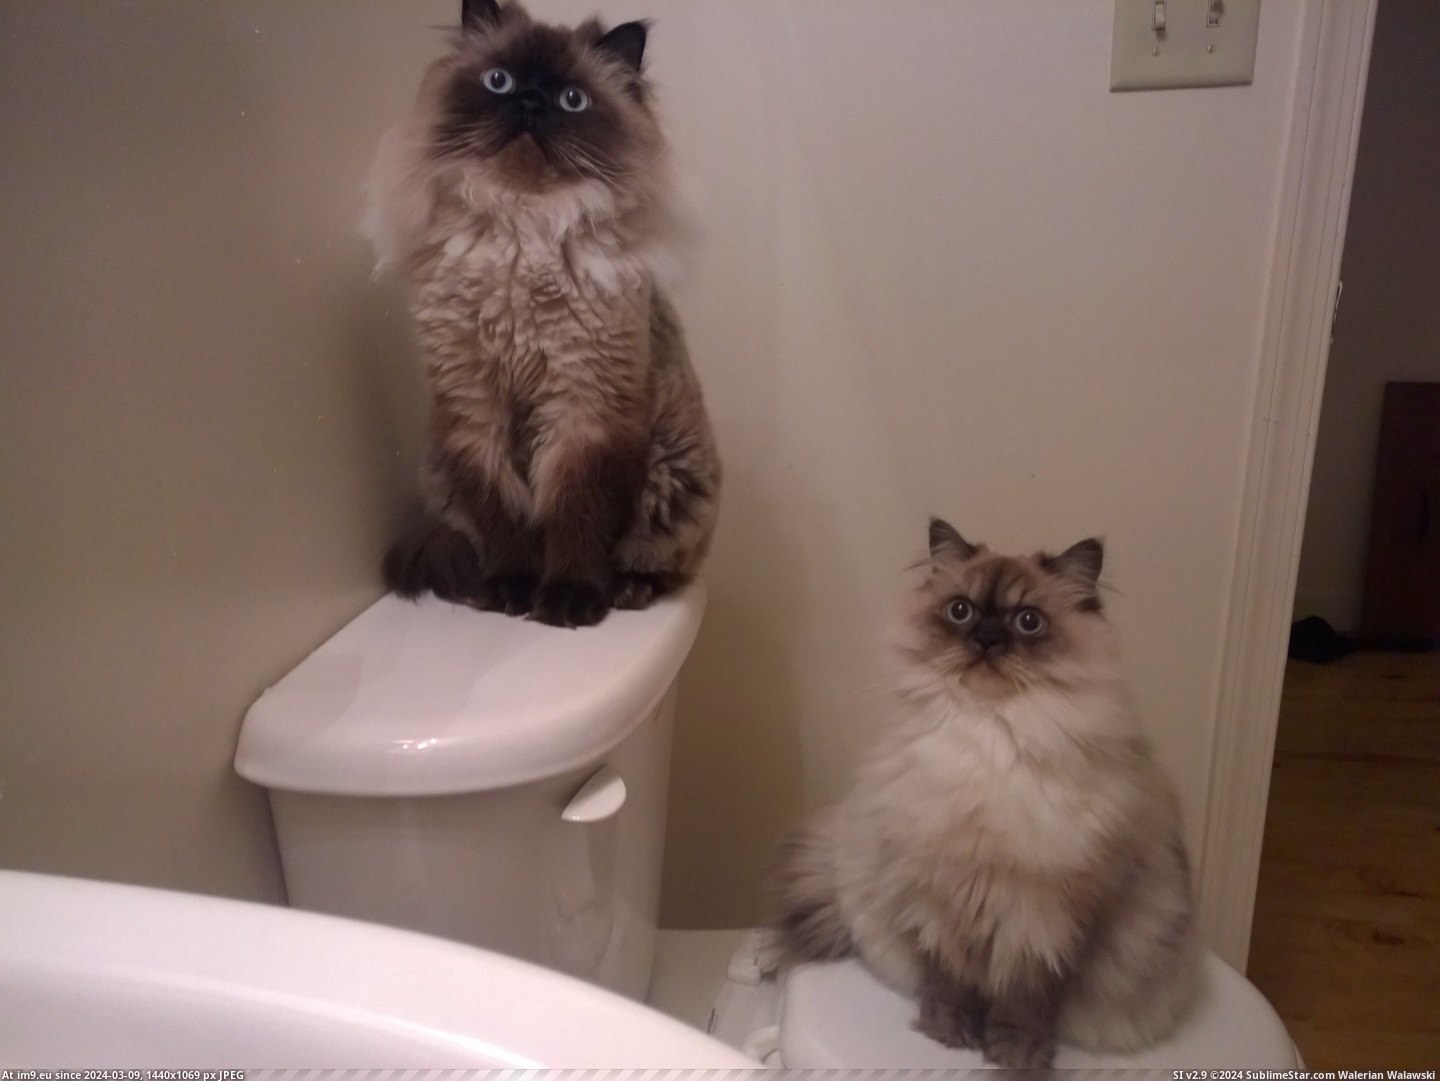 #Time #Wait #Shower [Aww] They wait here every time the shower is on Pic. (Bild von album My r/AWW favs))